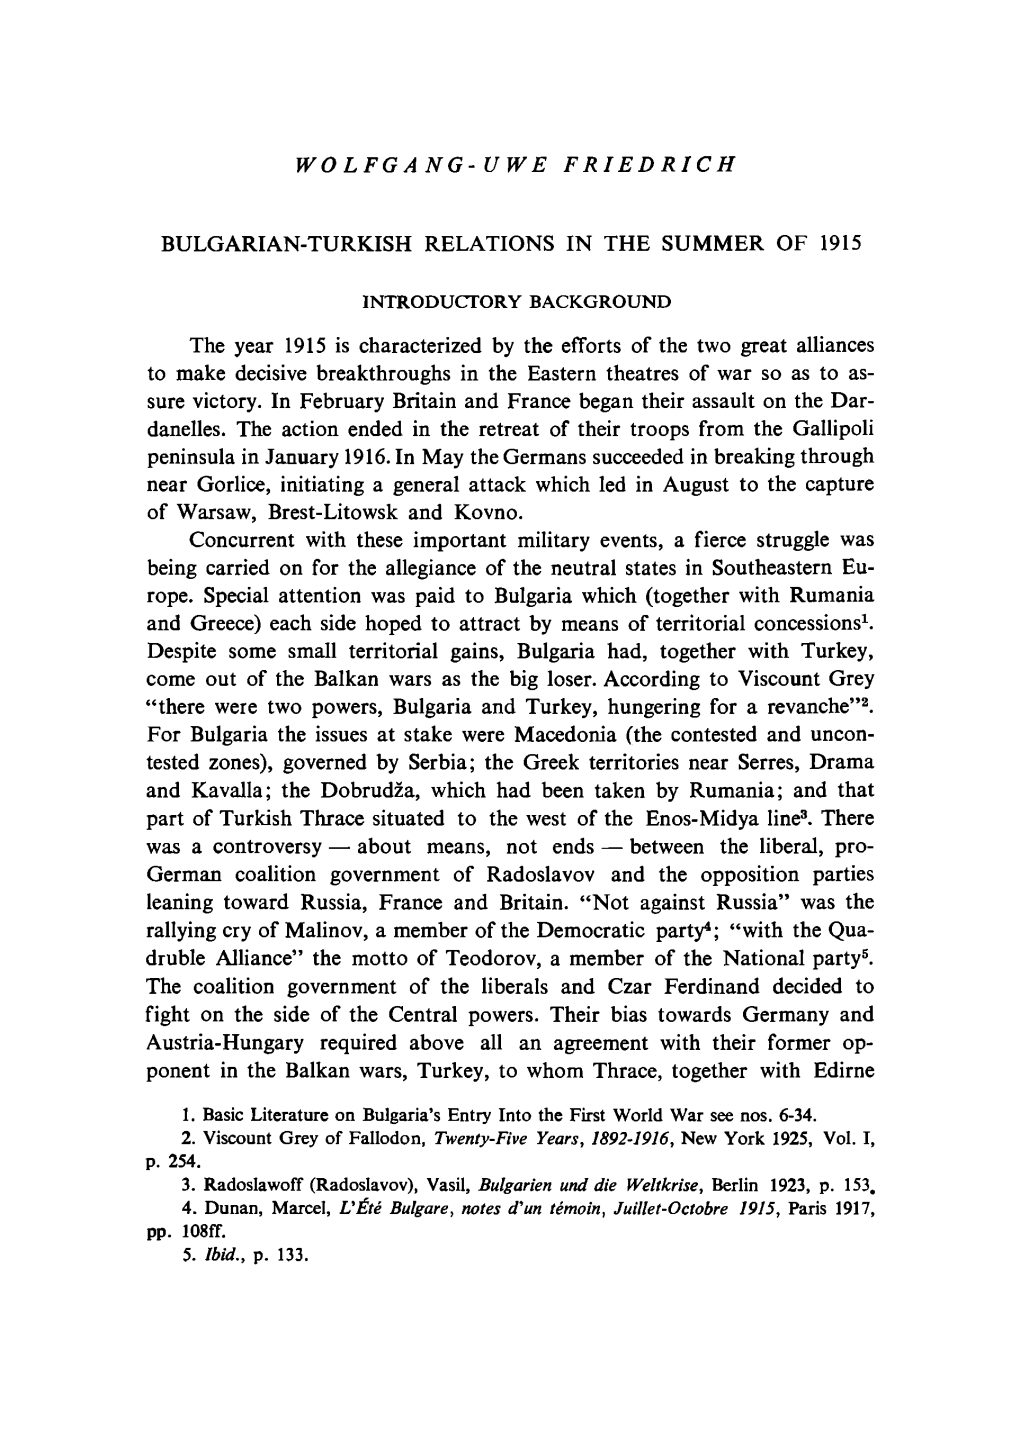 BULGARIAN-TURKISH RELATIONS in the SUMMER of 1915 The